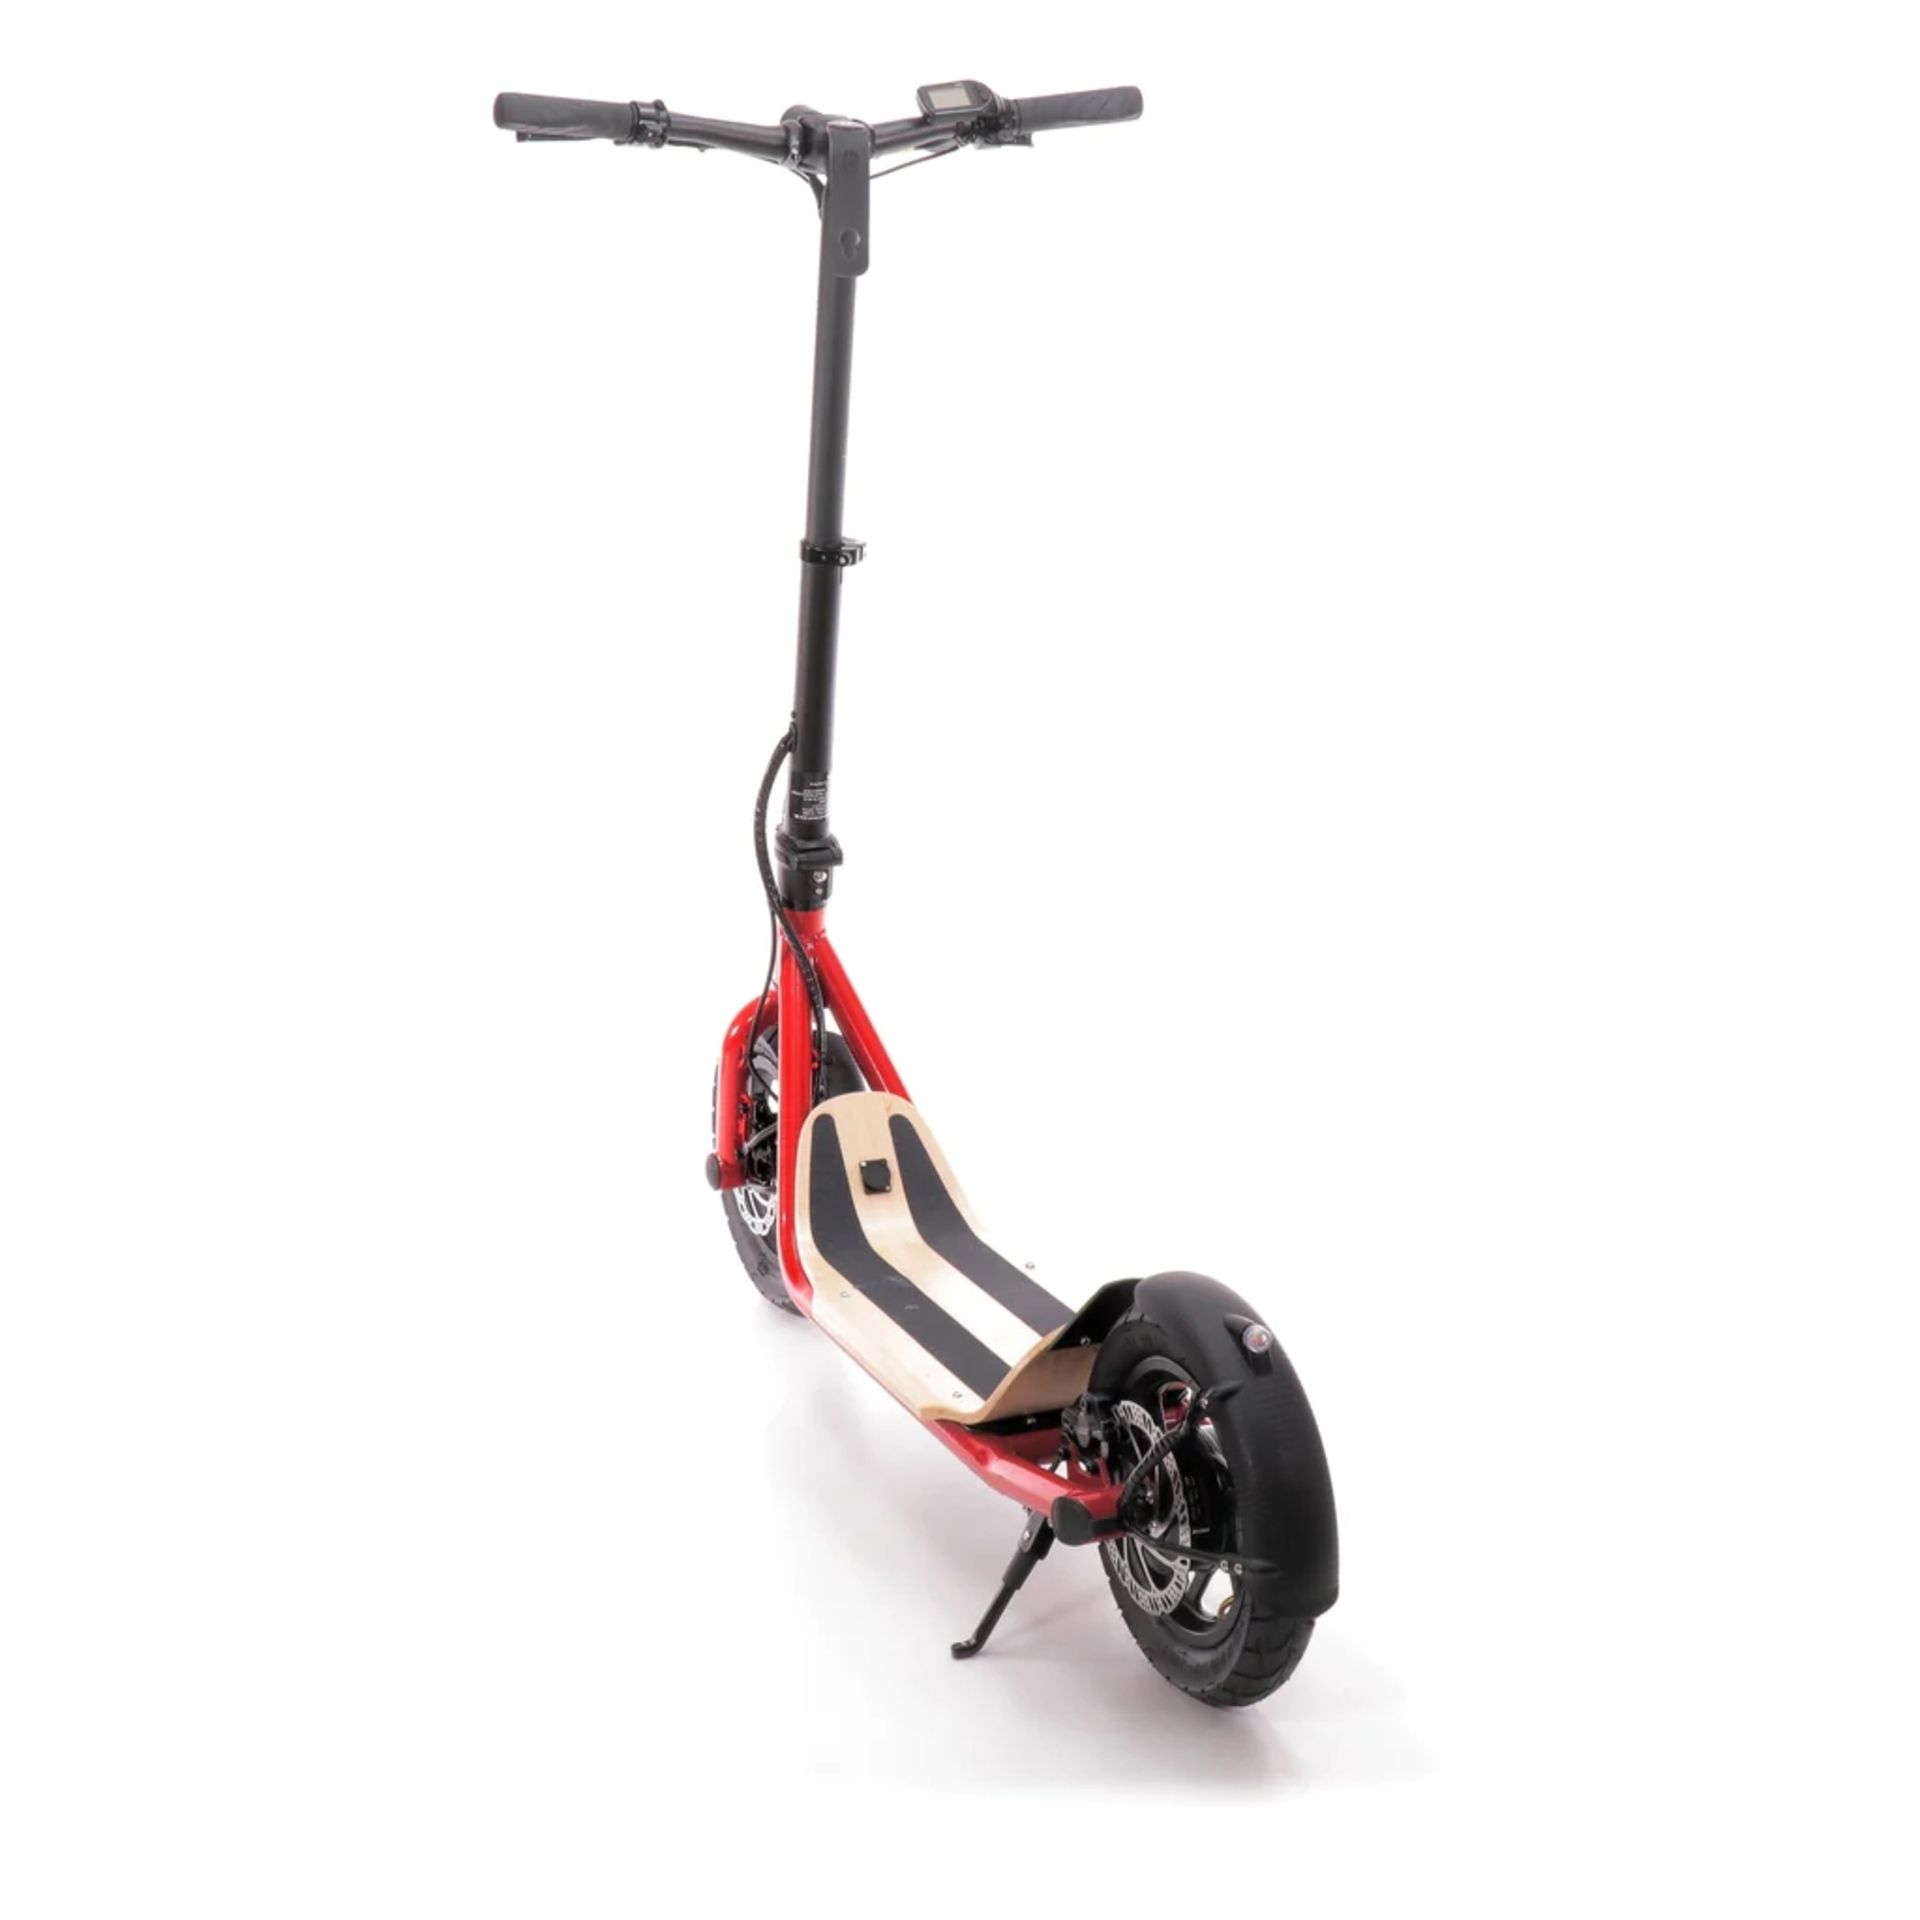 BRAND NEW 8TEV B12 PROXI CLASSIC ELECTRIC SCOOTER RED RRP £1299, Perfect city commuter vehicle - Image 3 of 3